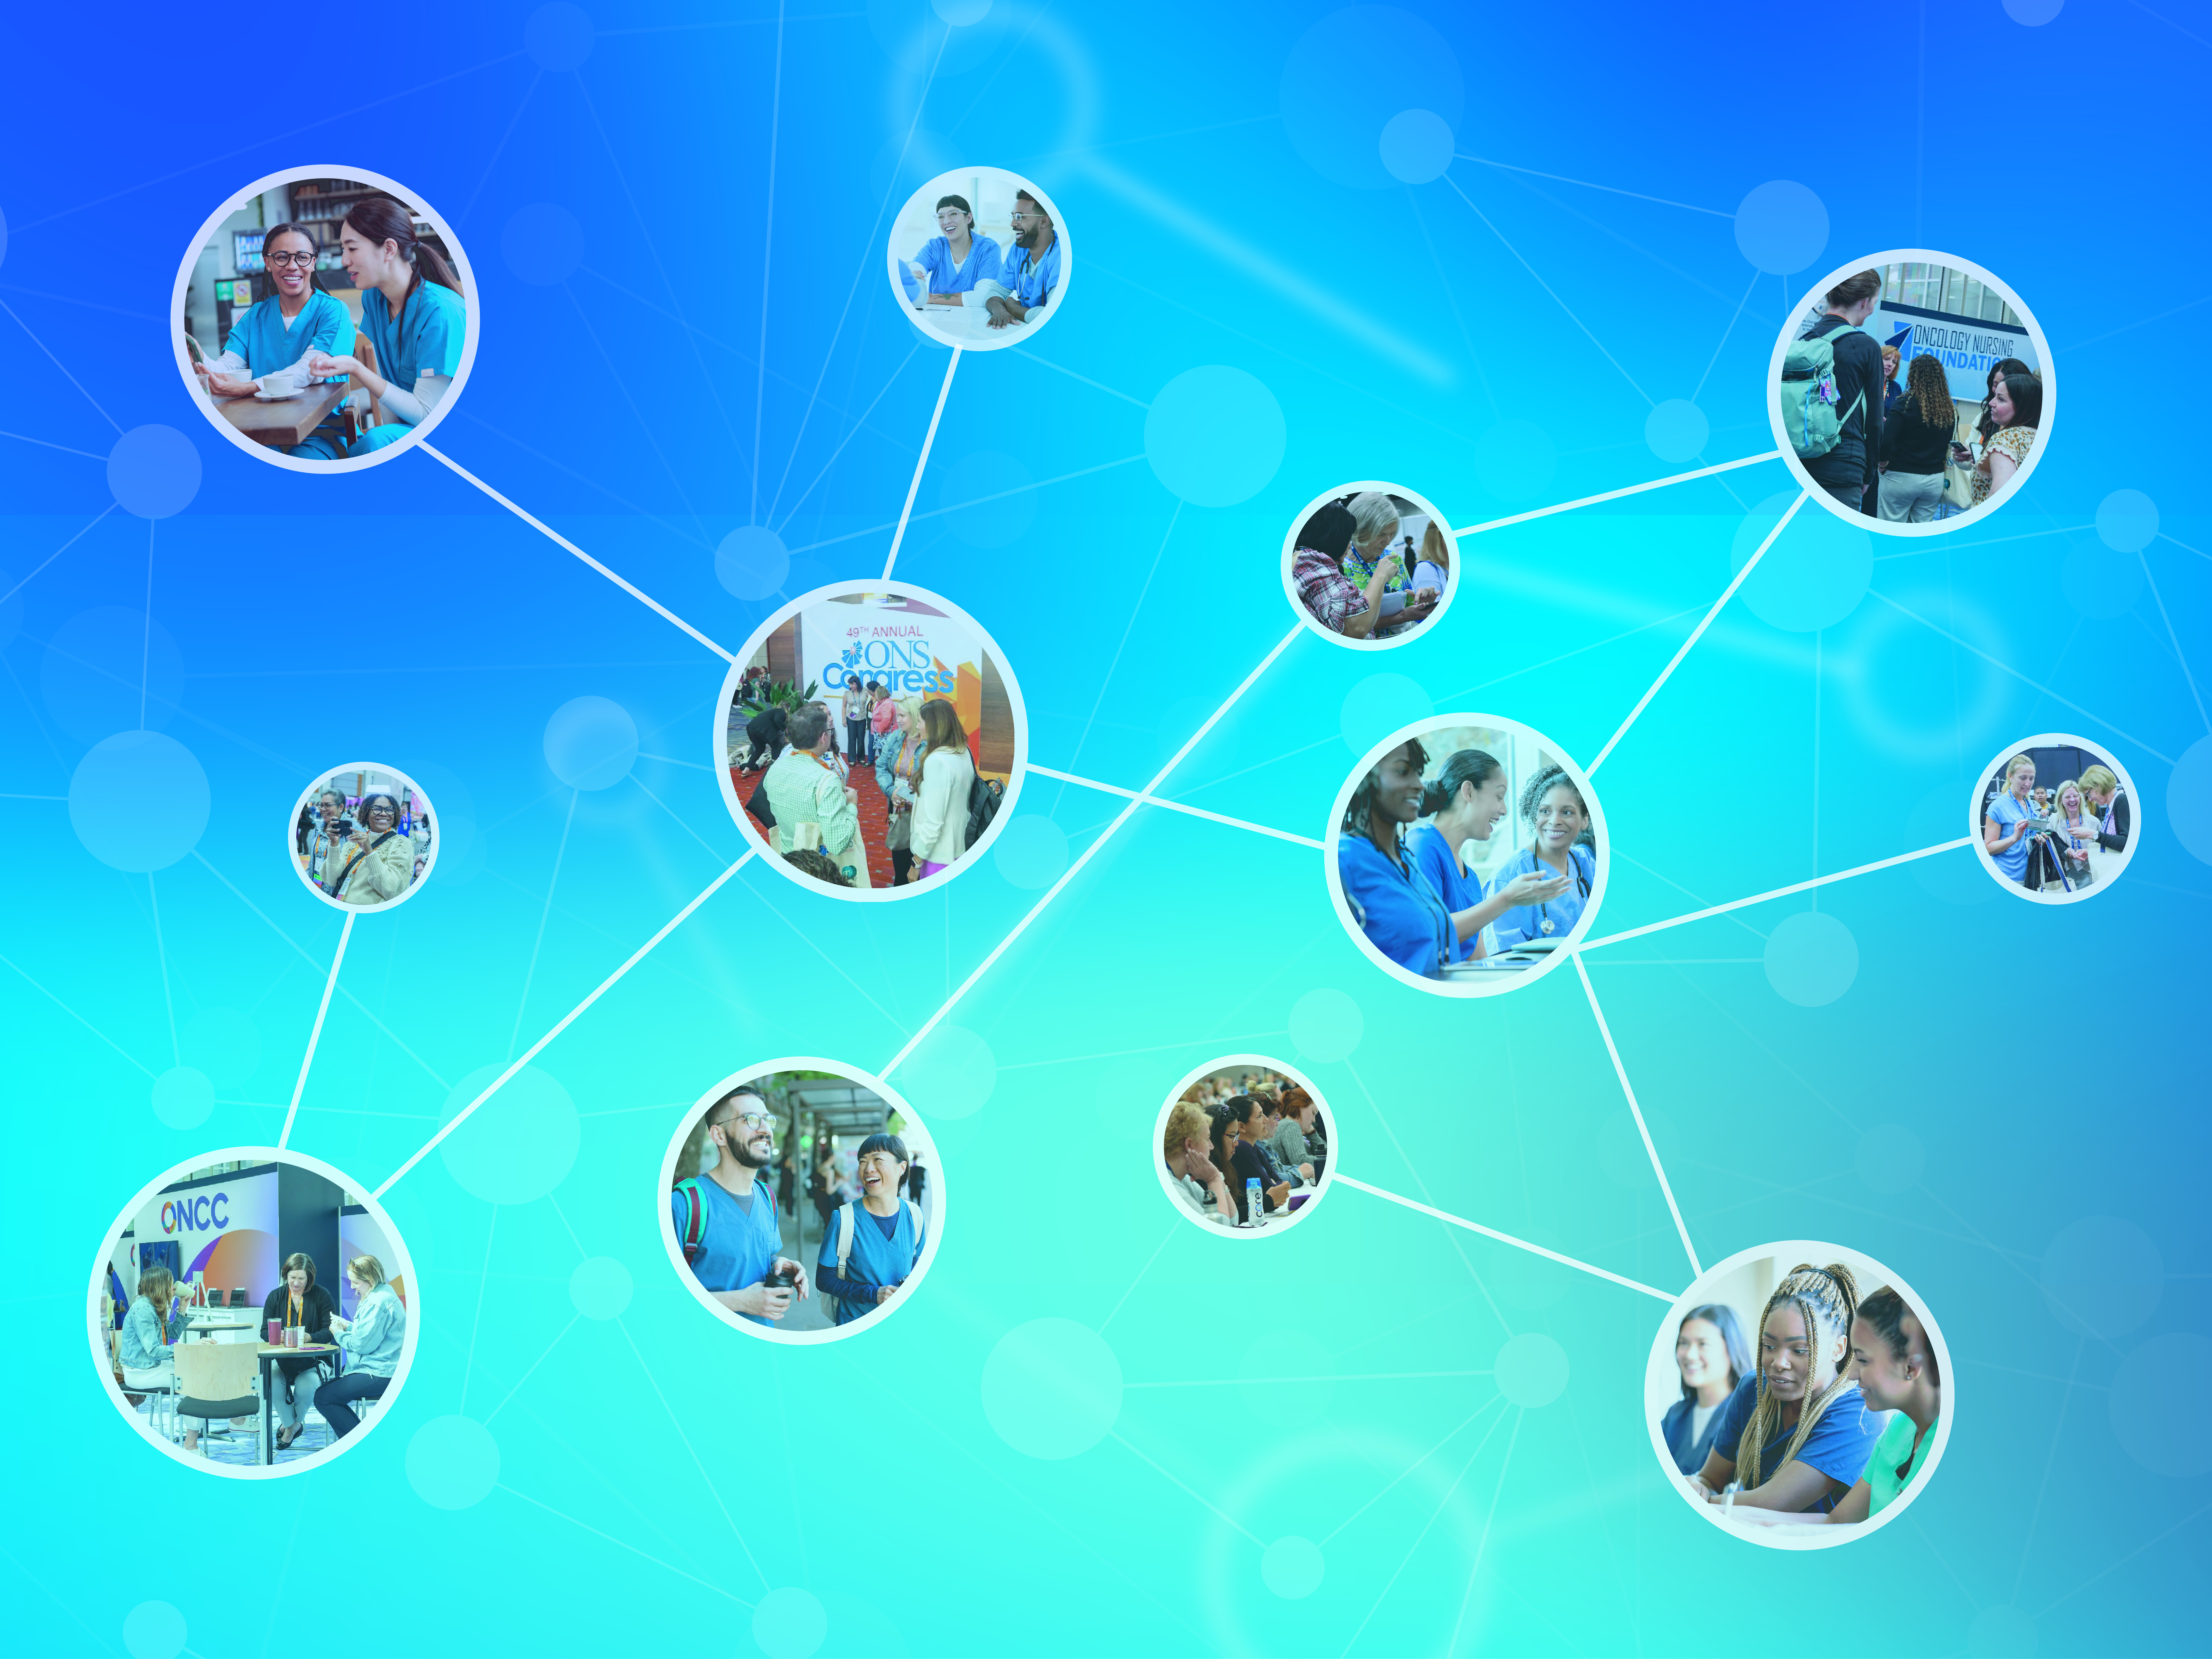 webbed images of nurses on a blue gradient background